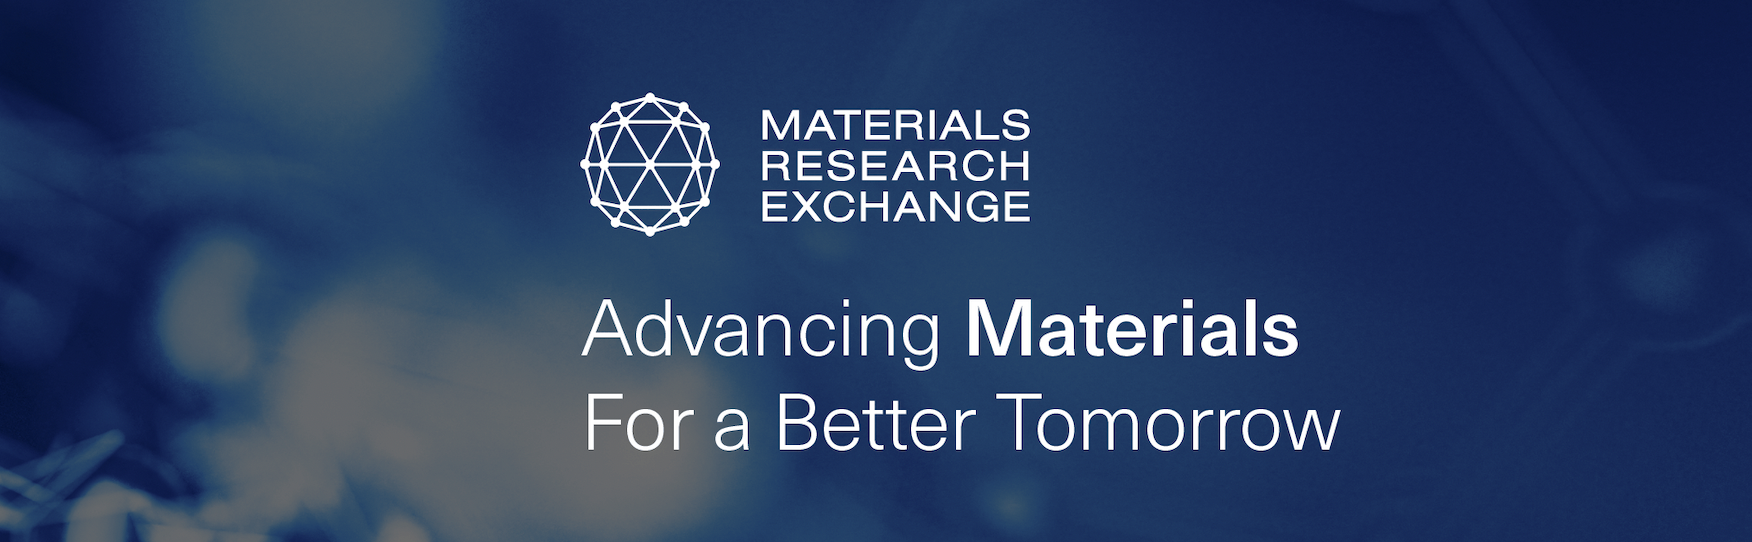 Materials Research Exchange 2022 Event - Advancing Materials For a Better Tomorrow